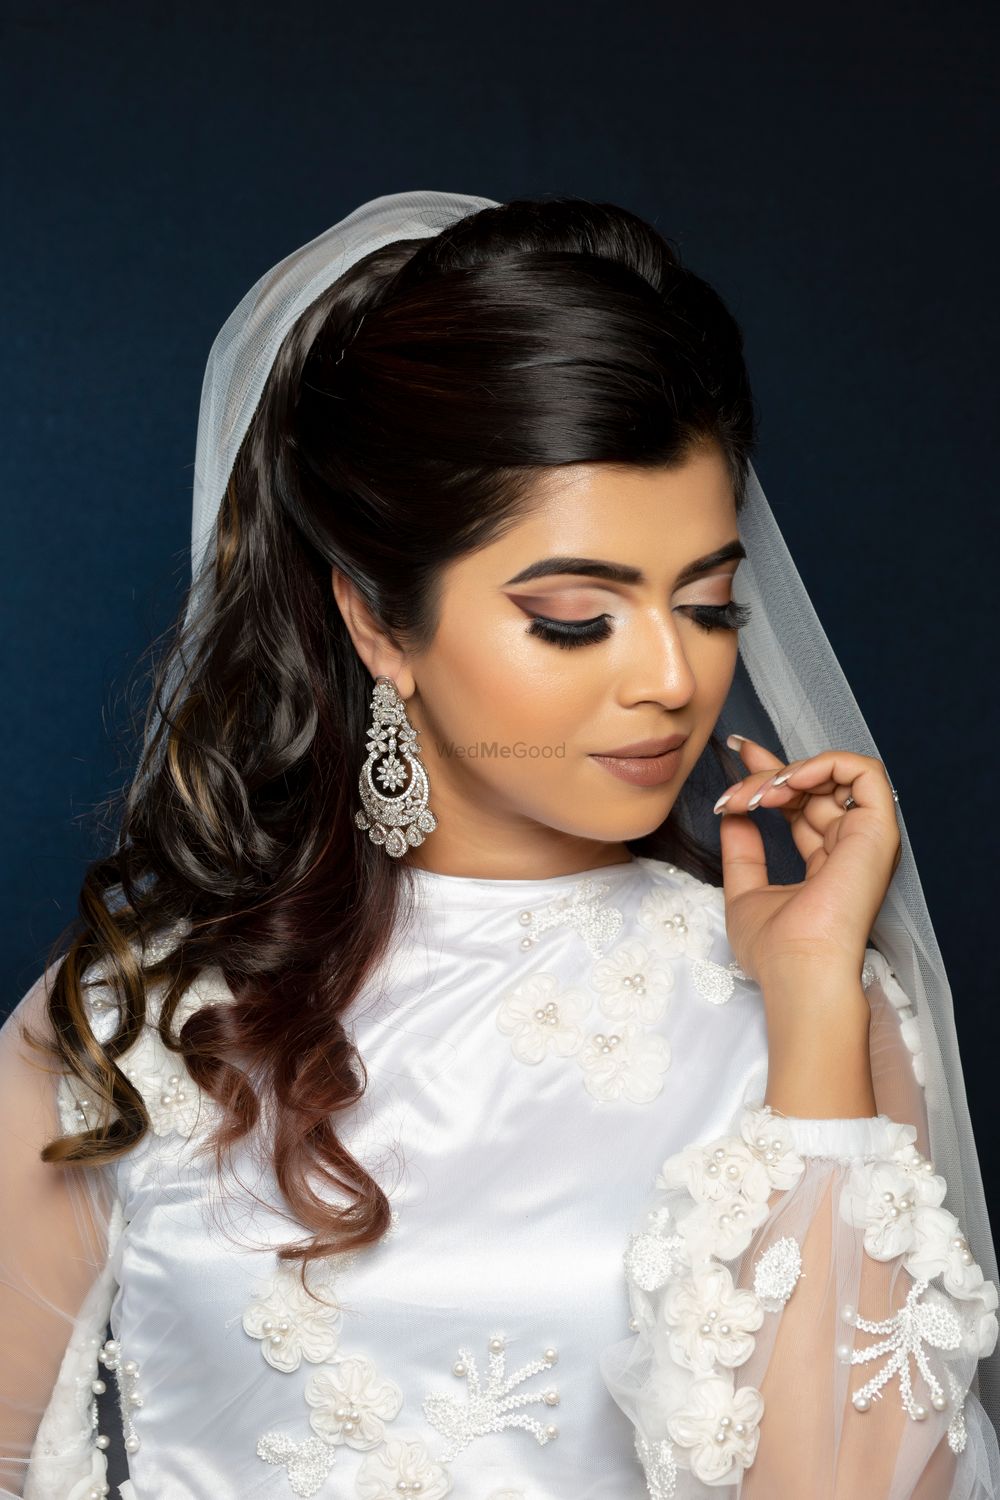 Photo From Christian Bridal Makeup - By Zorains Studio